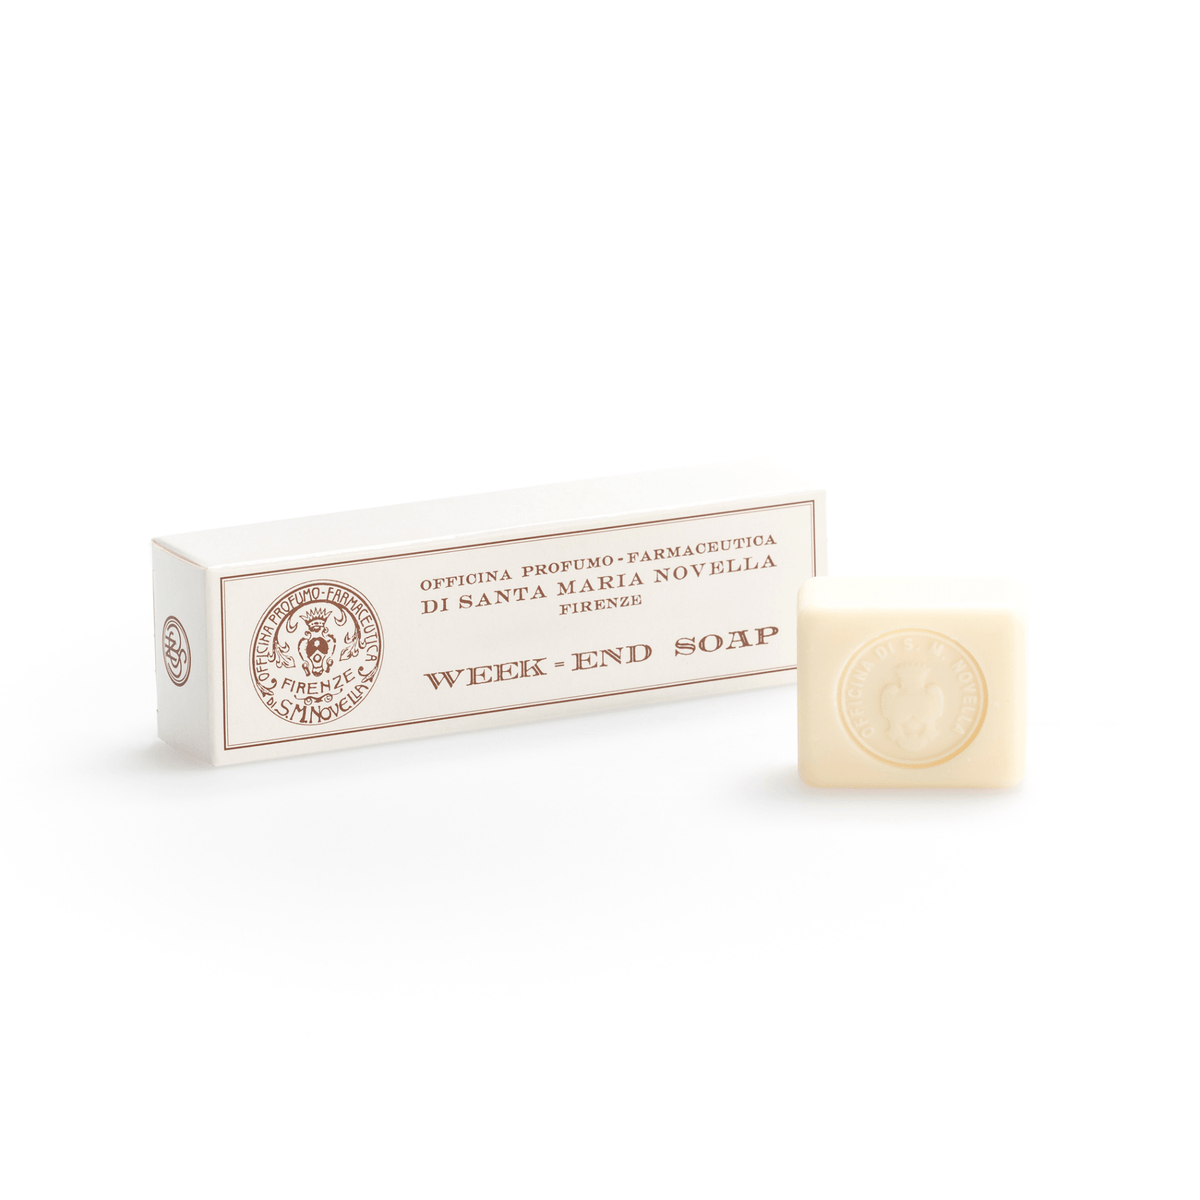 Primary Image of Week-End Soap